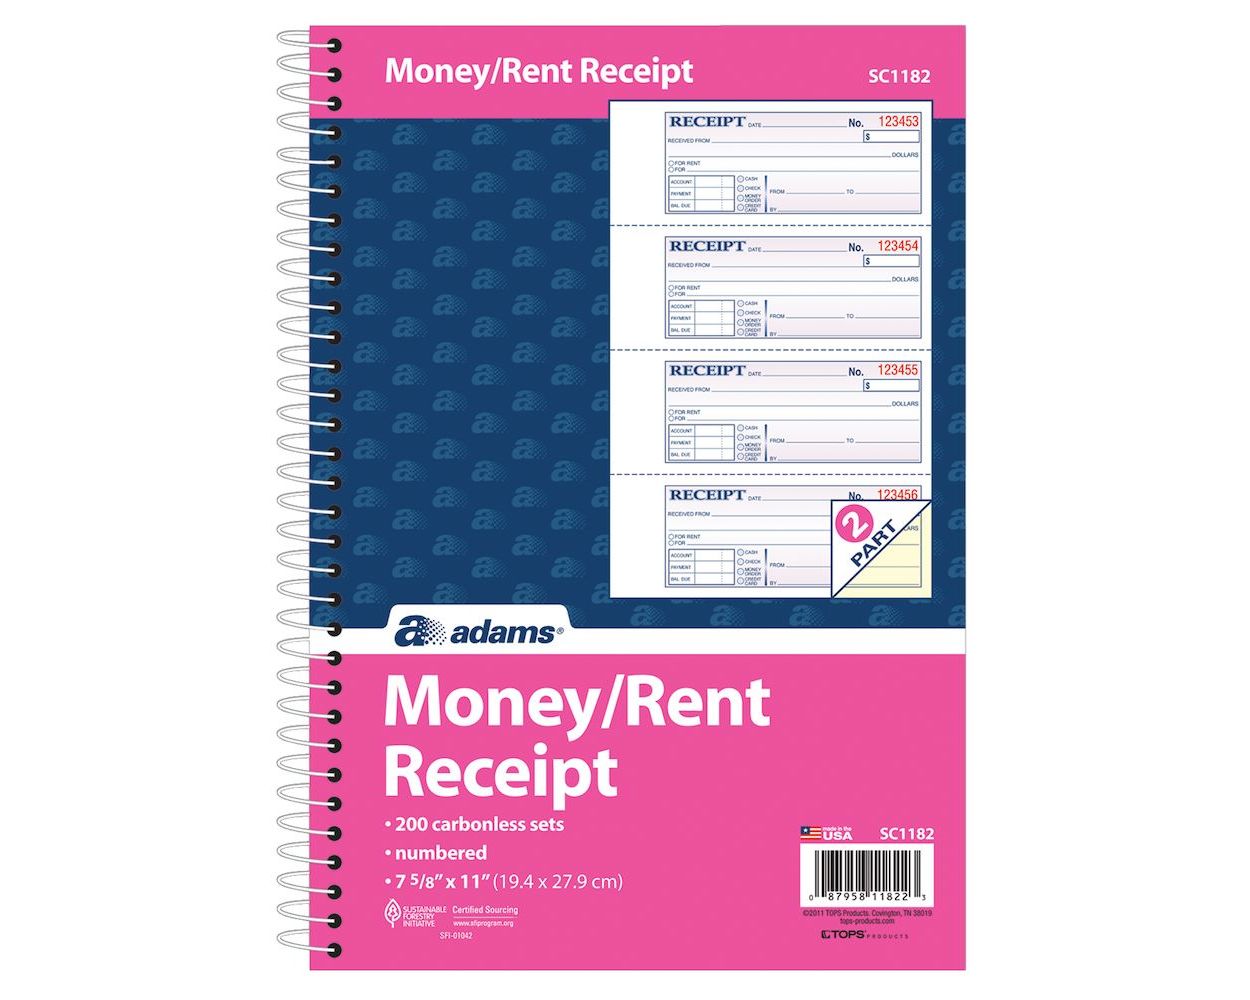 Spiral Bound Adams Money and Rent Receipt Book 7-5/8 x 11 SC1182 4 Receipts per Page White/Canary 200 Sets per Book 2-Part Carbonless 